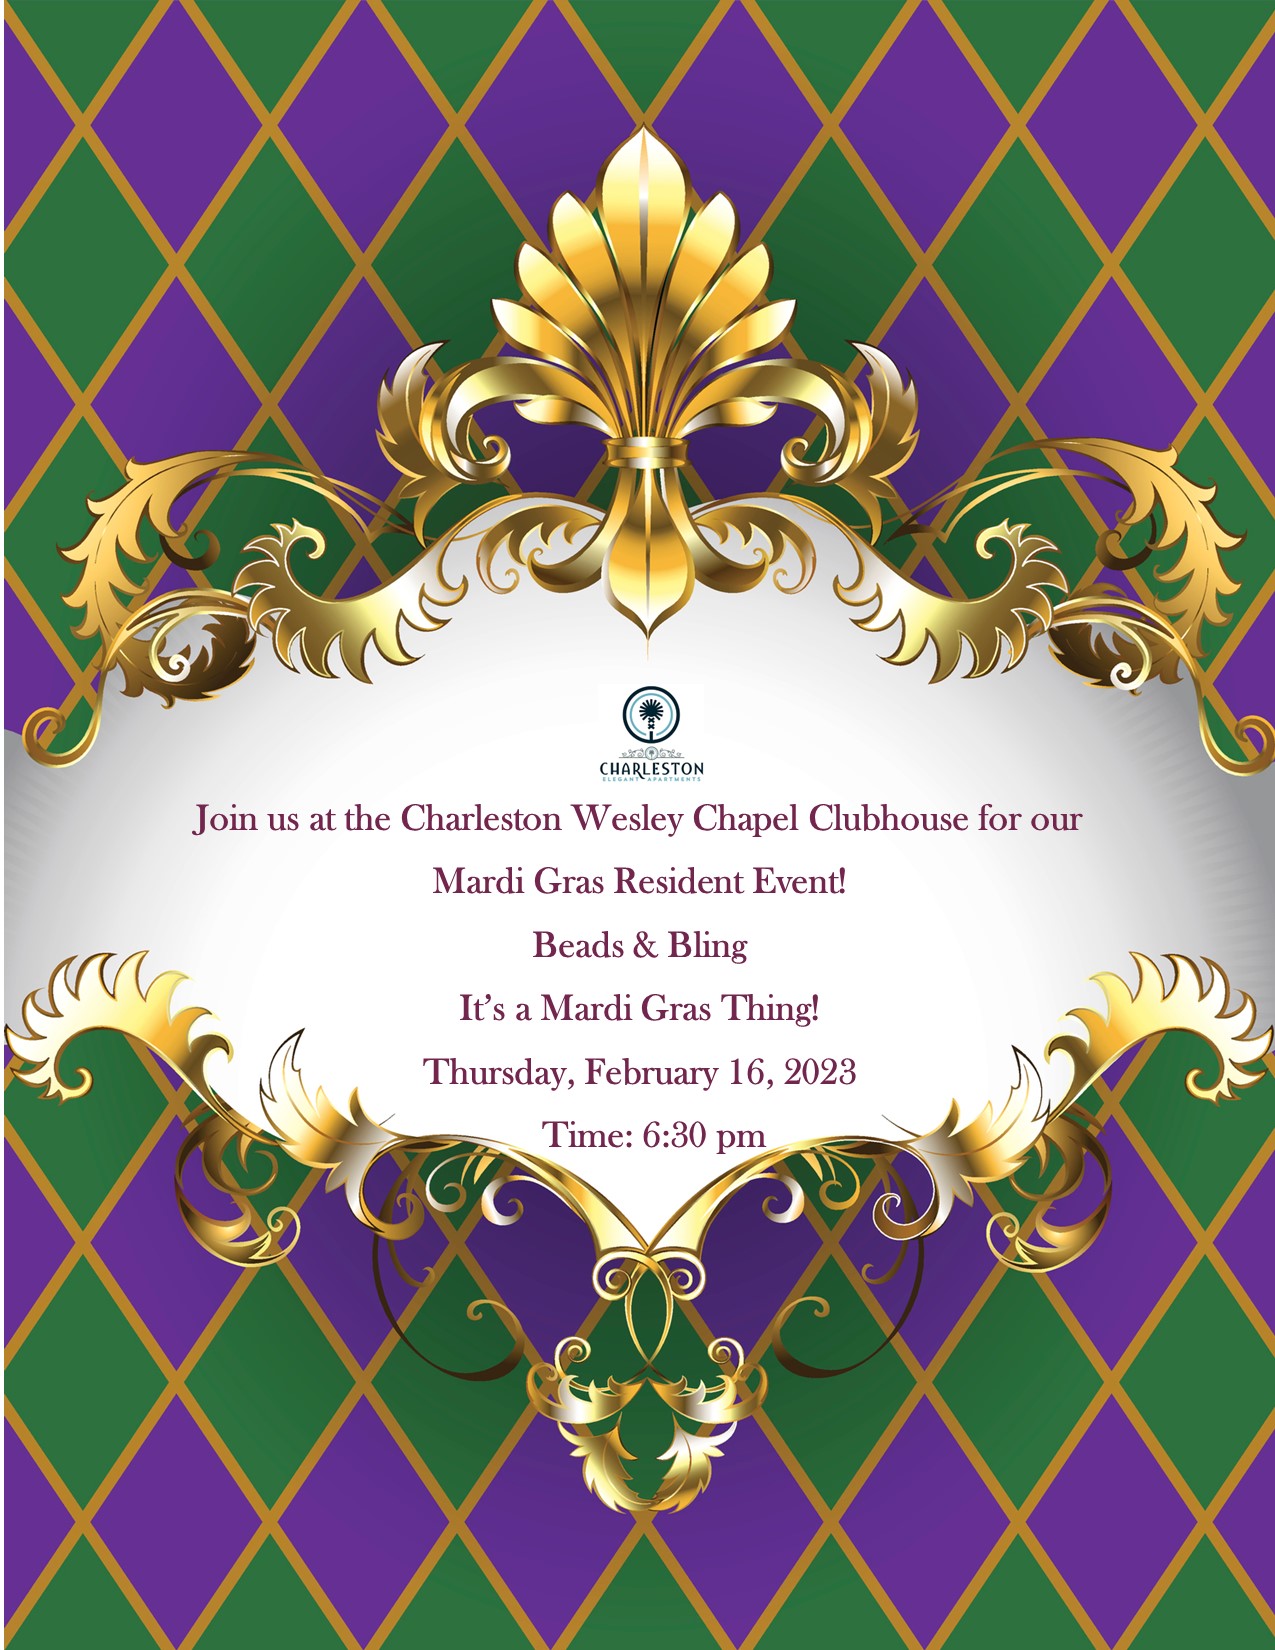 Mardi Gras resident event flyer with mardi gras colors that says thursday, february 16th, 2023 at 6:30pm